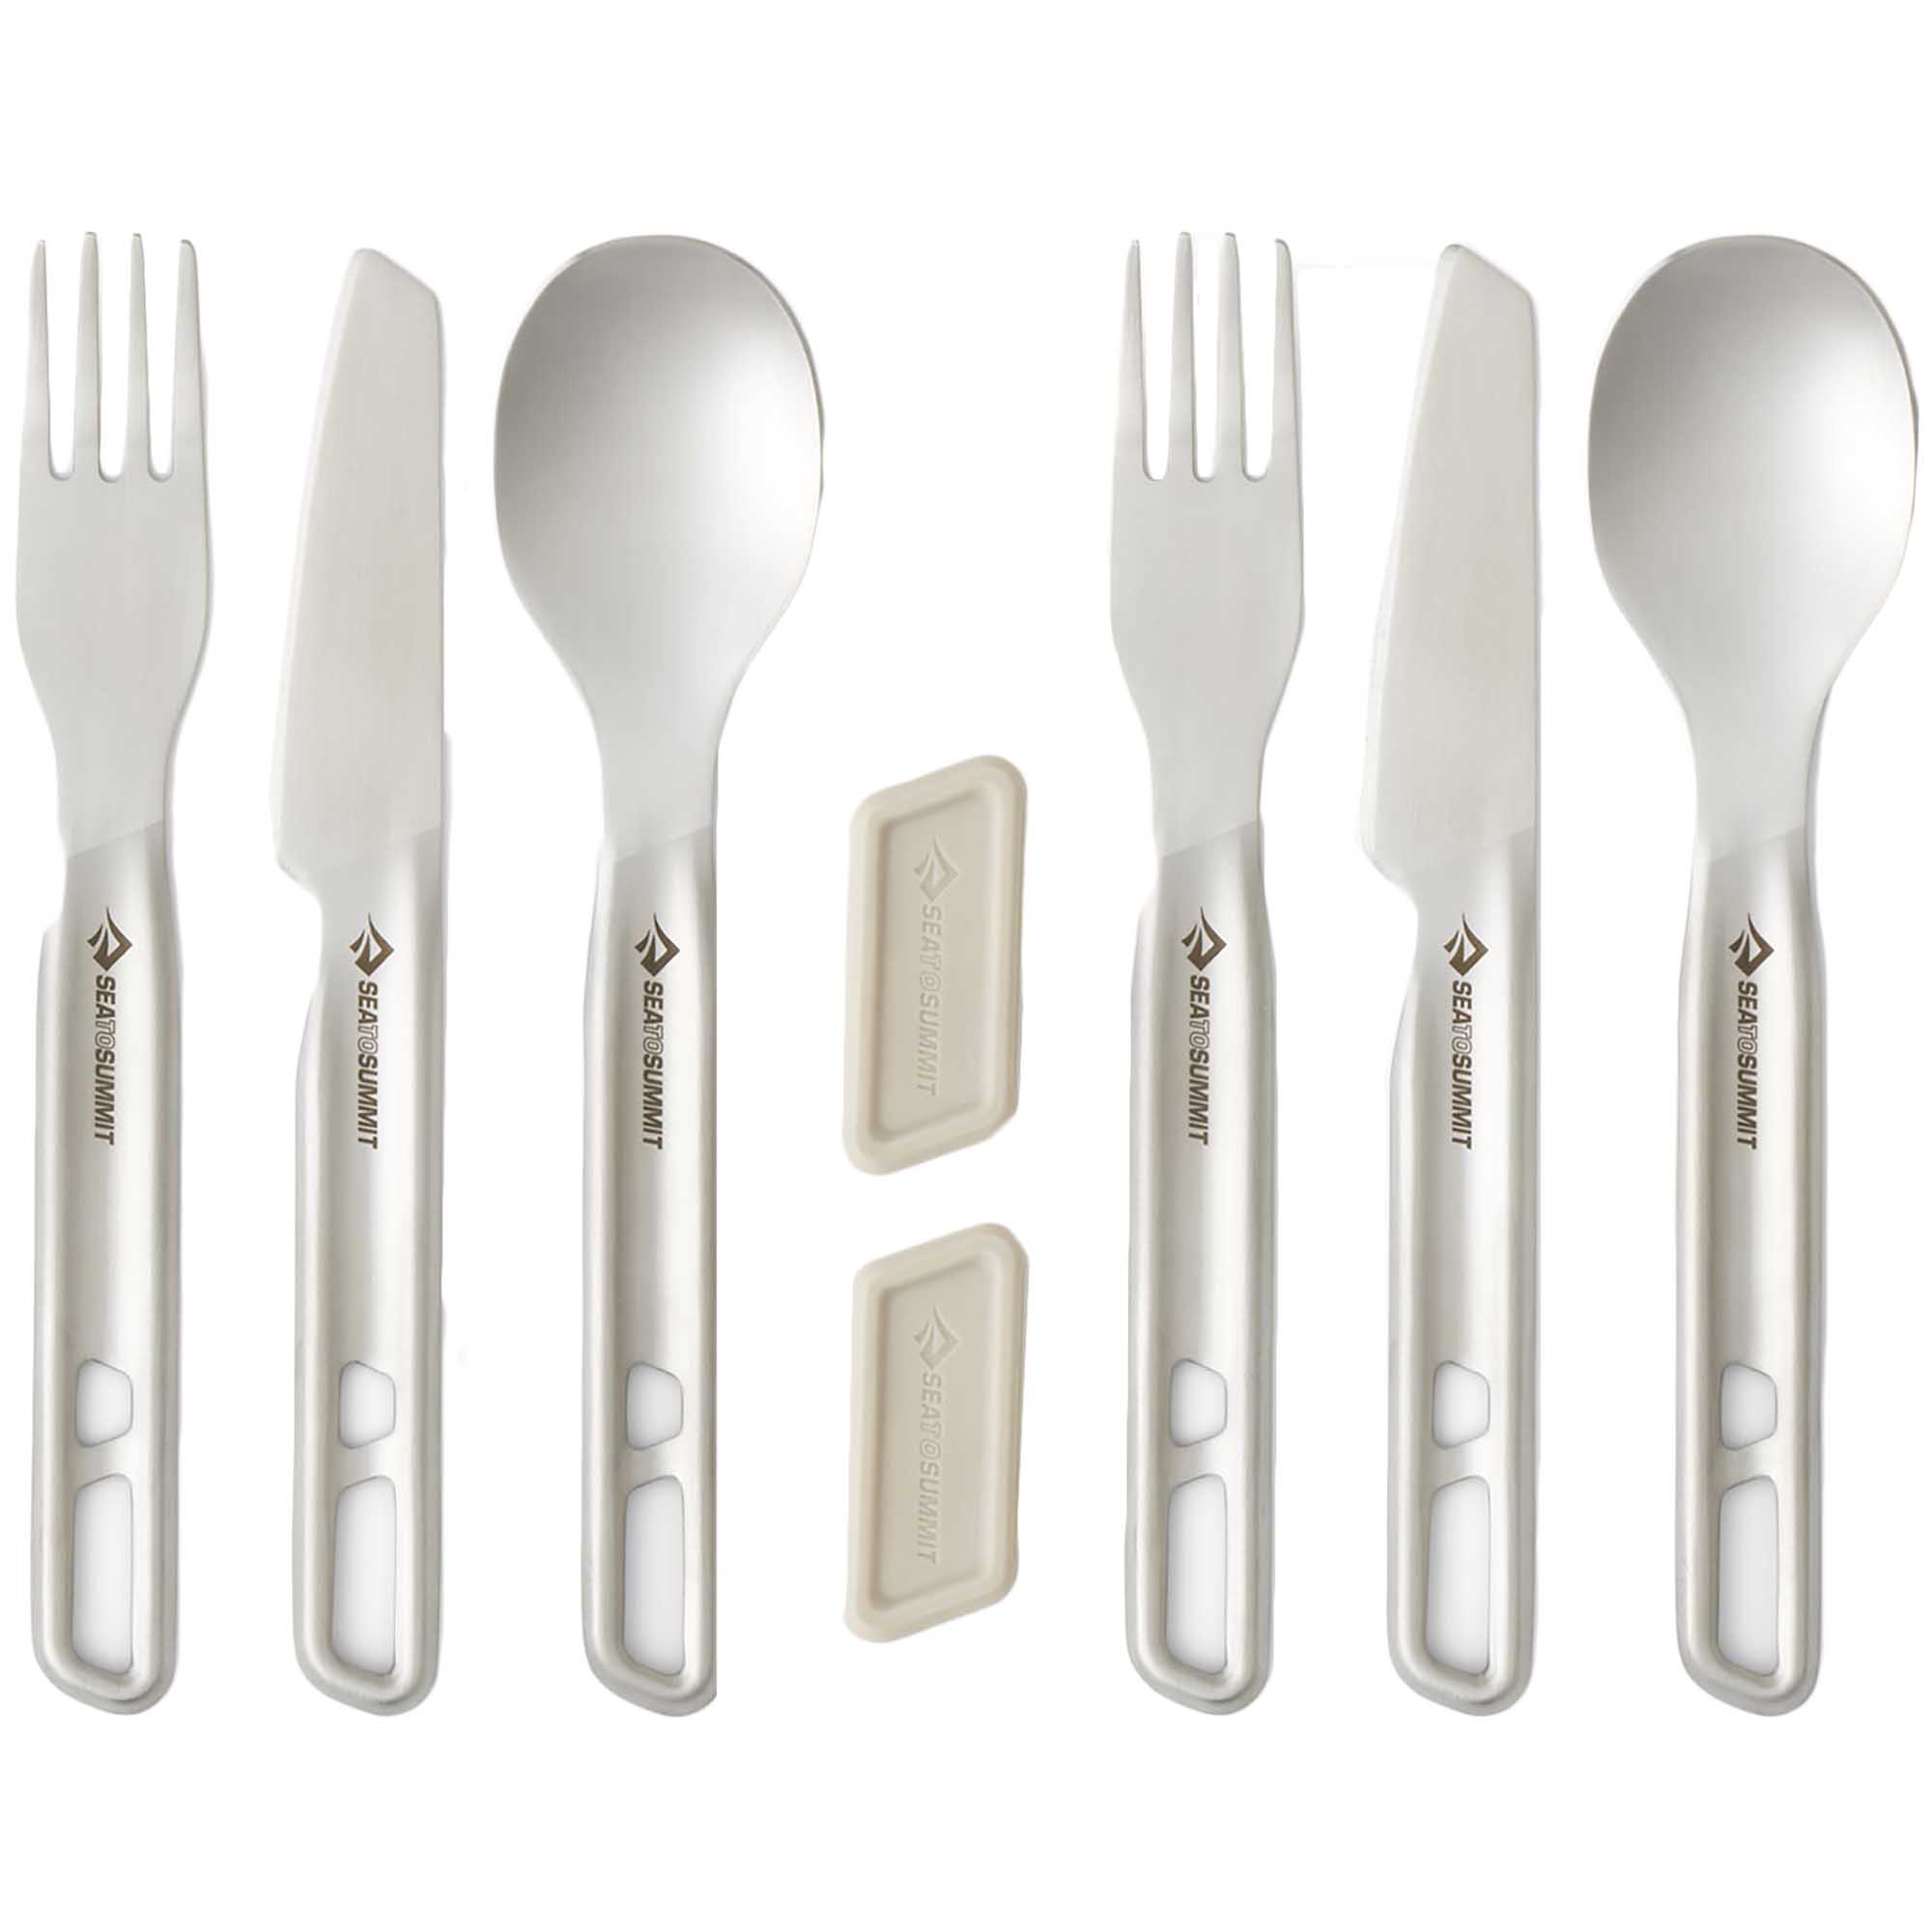 Sea to Summit Detour 6pc Stainless Steel Cutlery Set